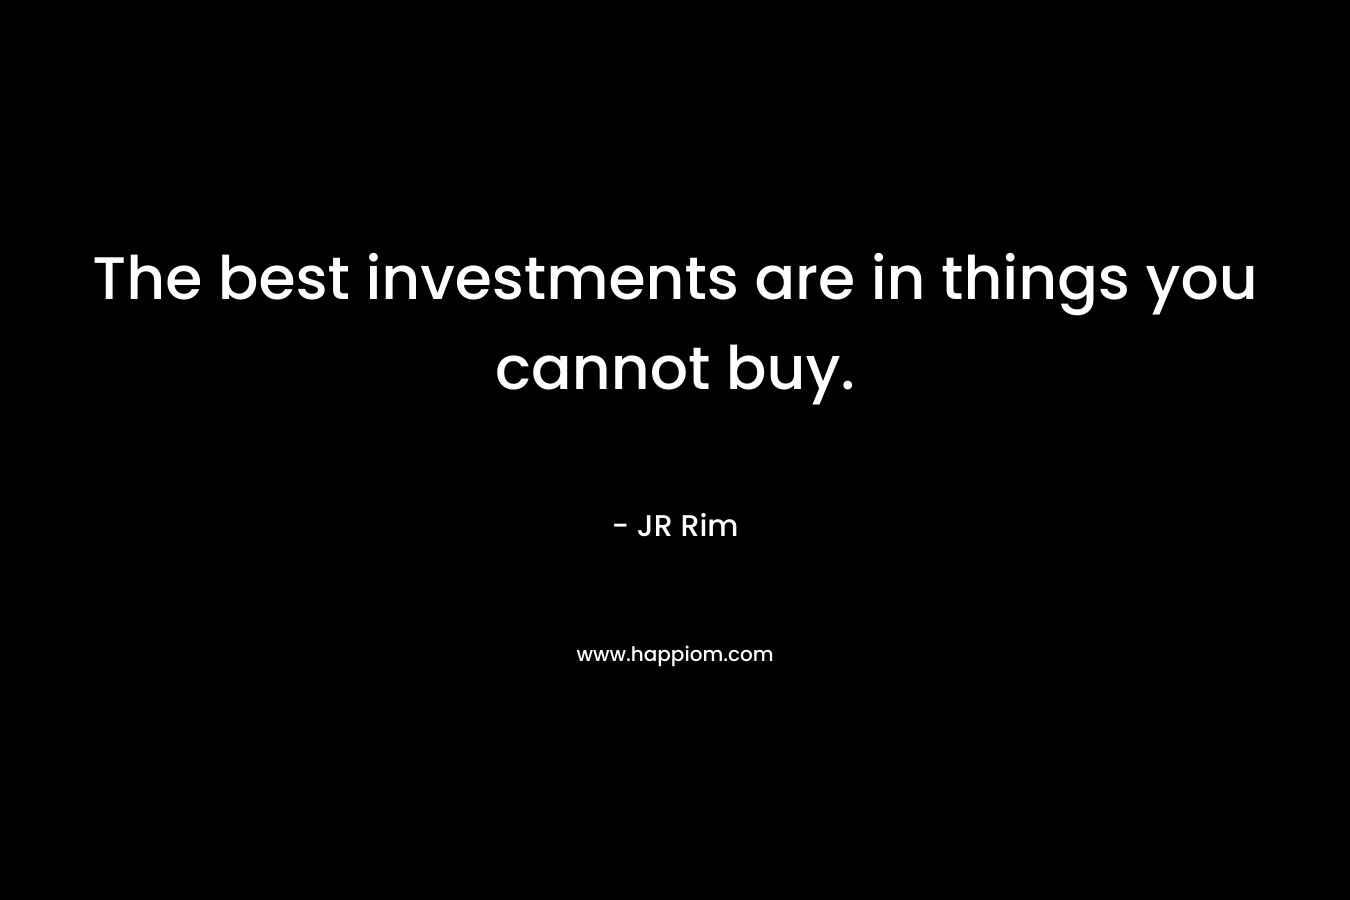 The best investments are in things you cannot buy.